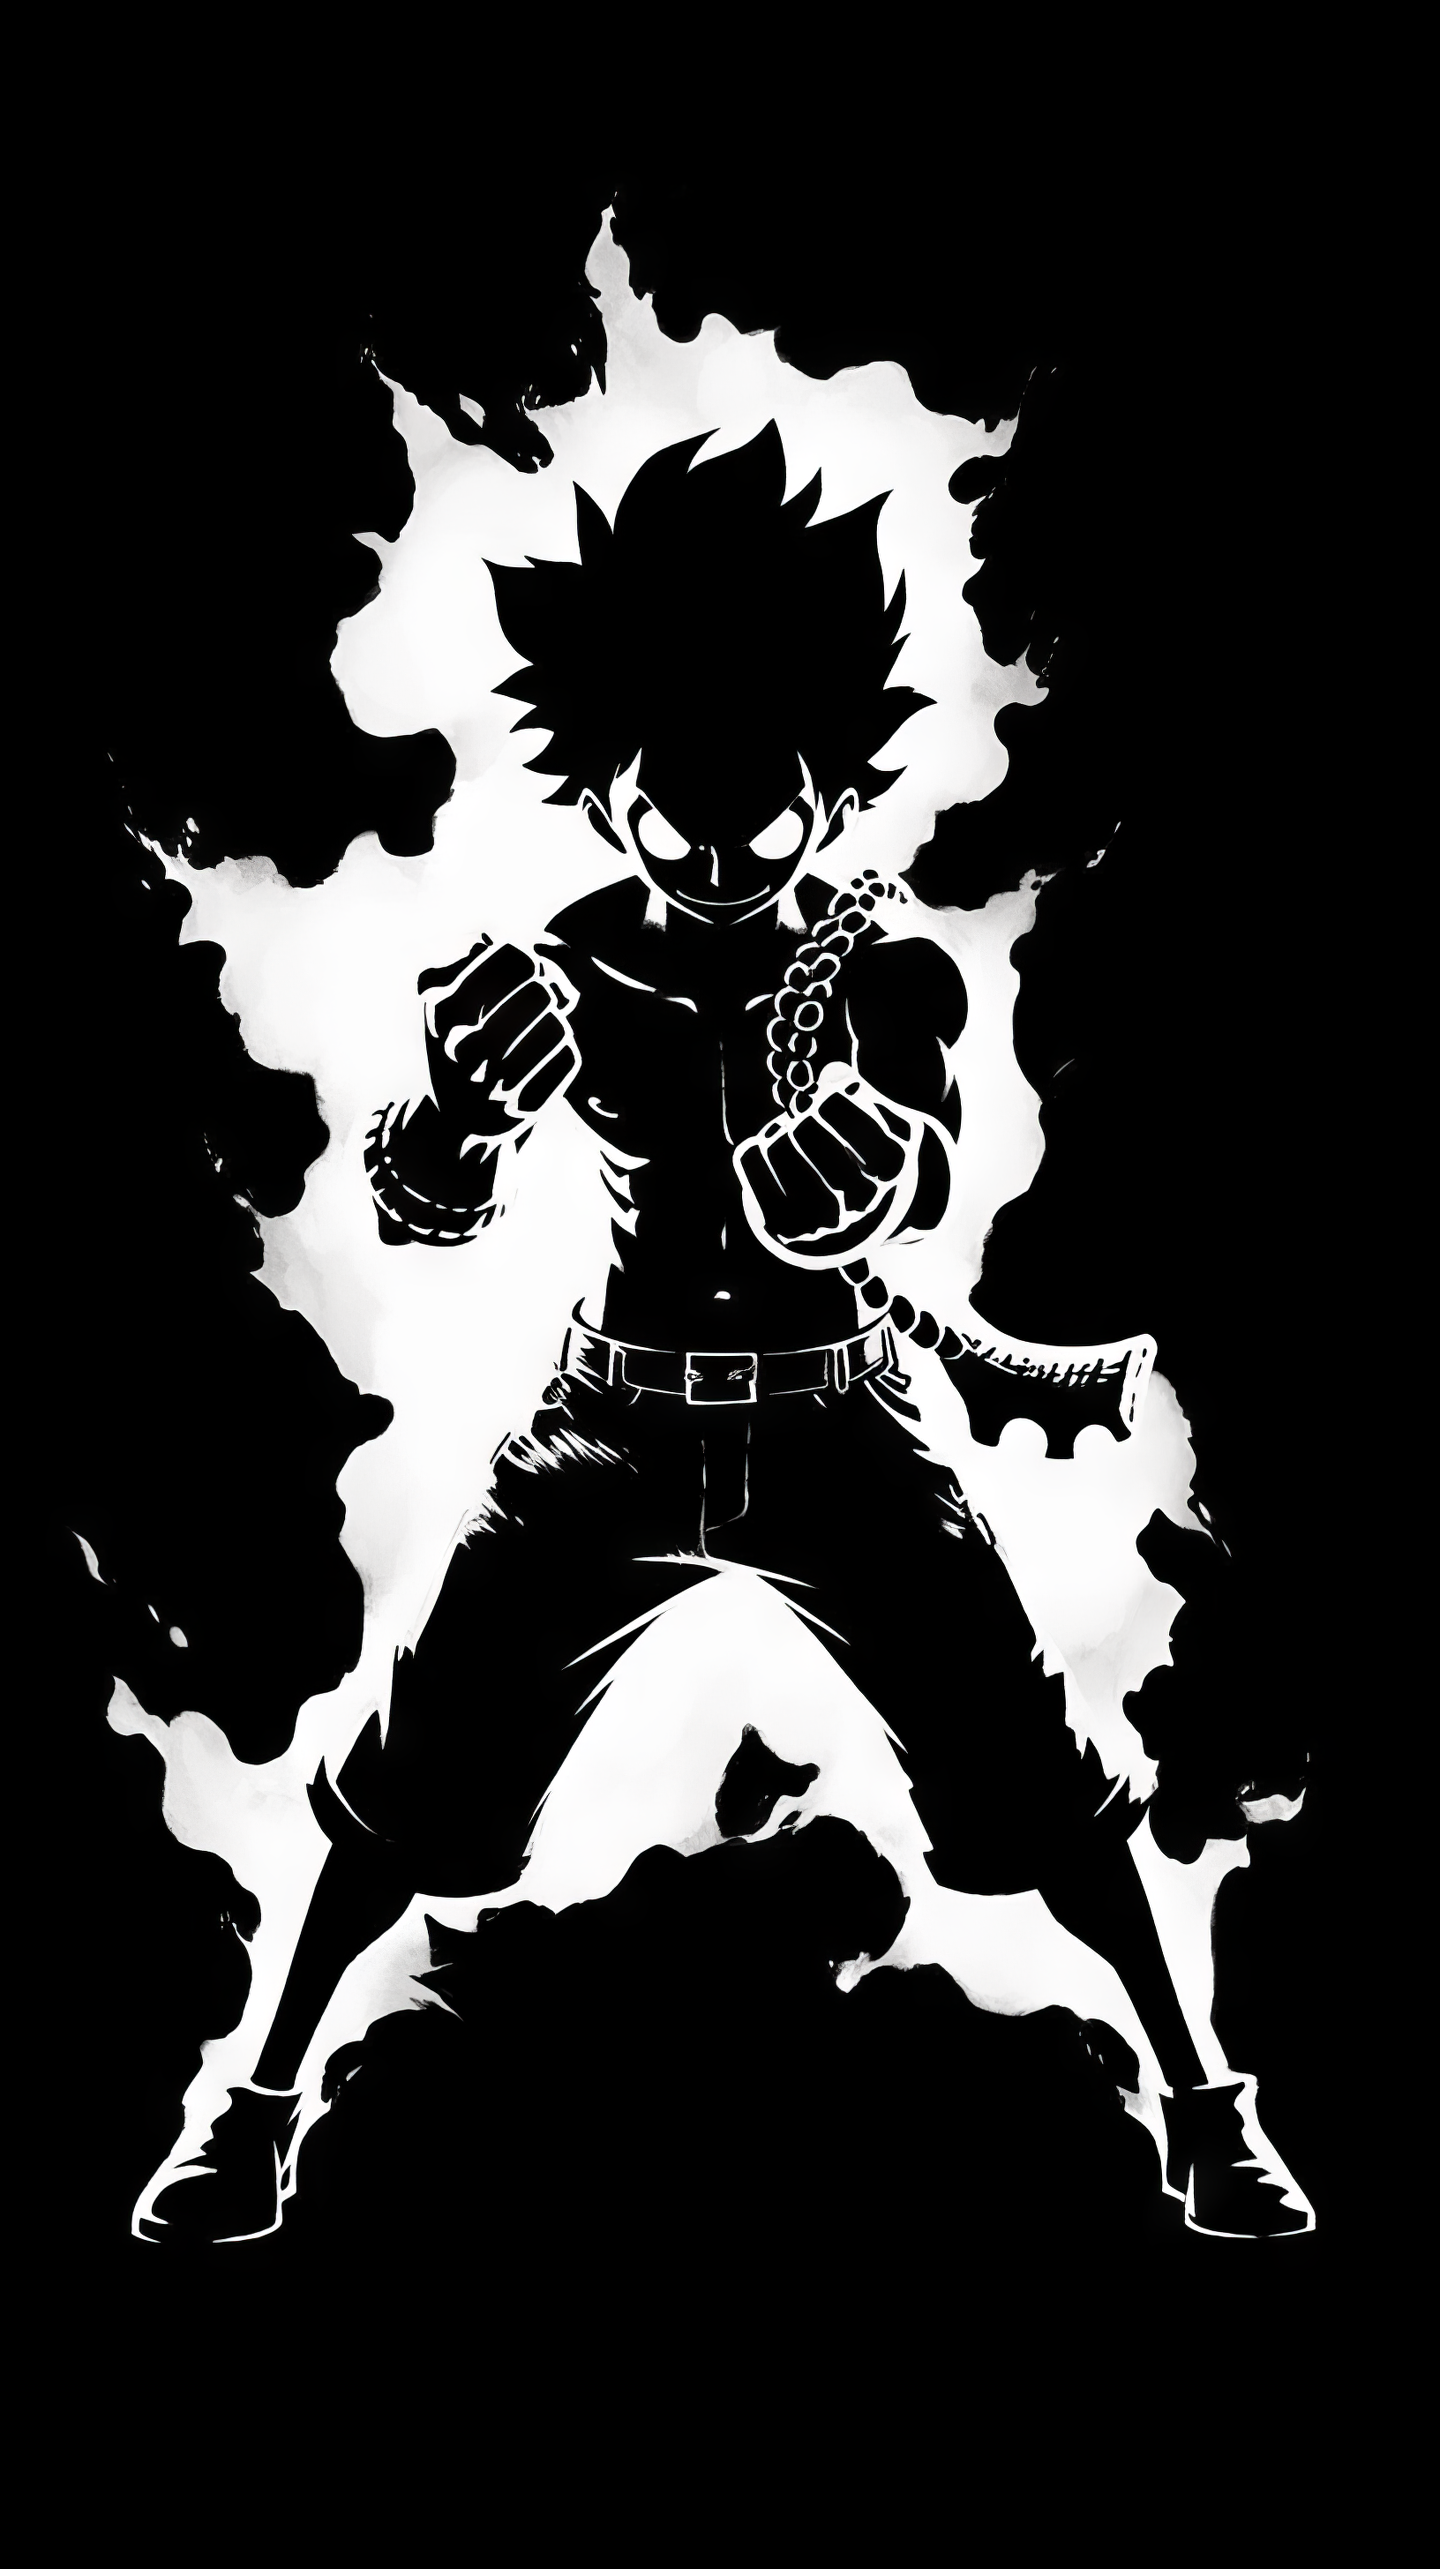 Black and white phone wallpaper featuring Monkey D. Luffy in Gear Fourth stance from One Piece anime series, ideal for fans looking to personalize their devices with a touch of manga flair.